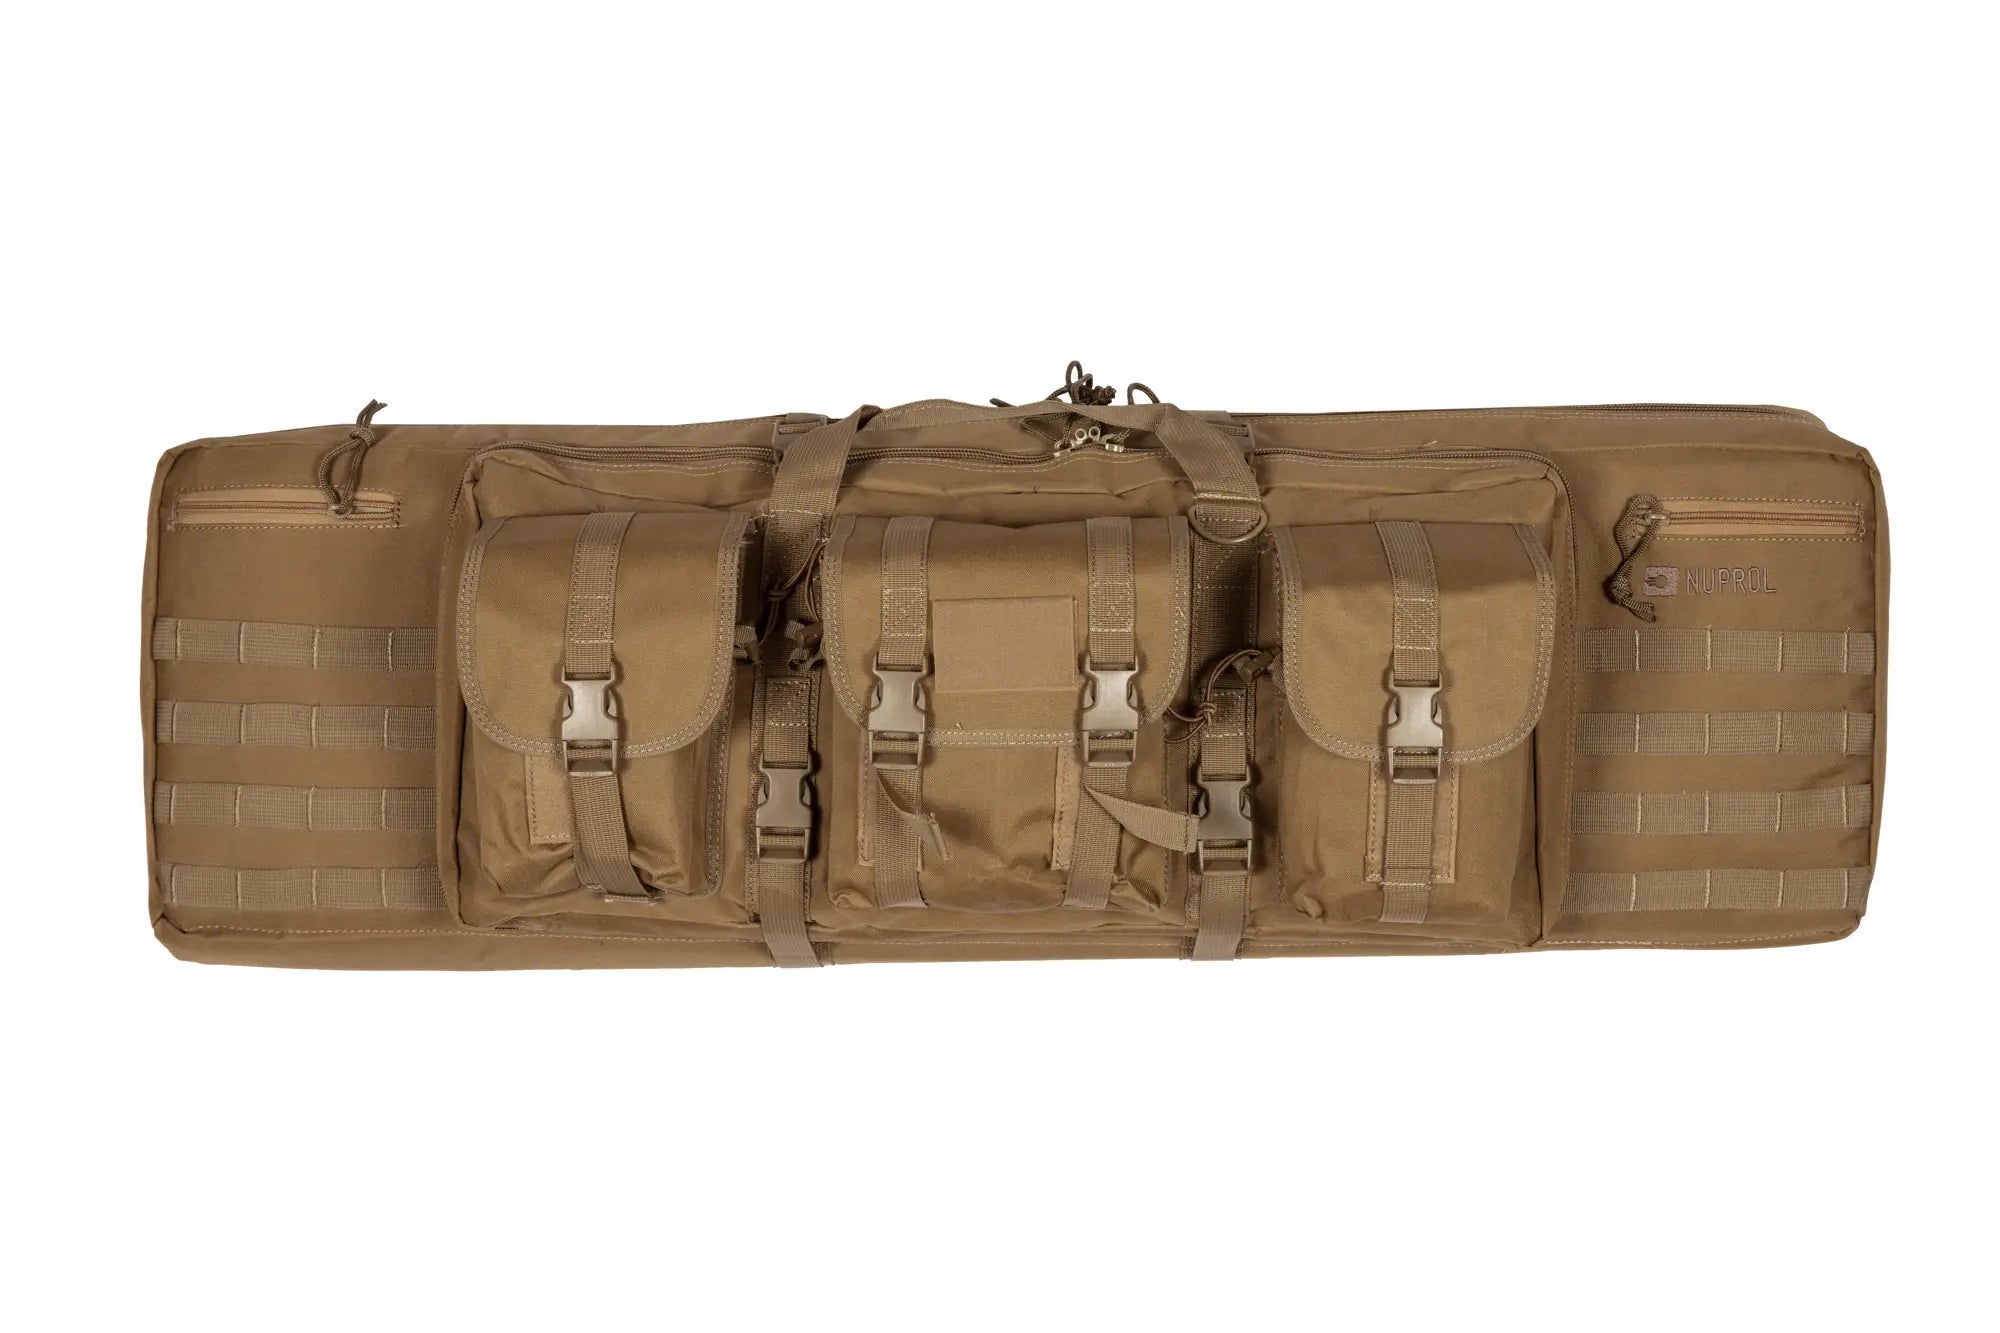 NP PMC Deluxe Soft Double Rifle Bag 42 - Tan"